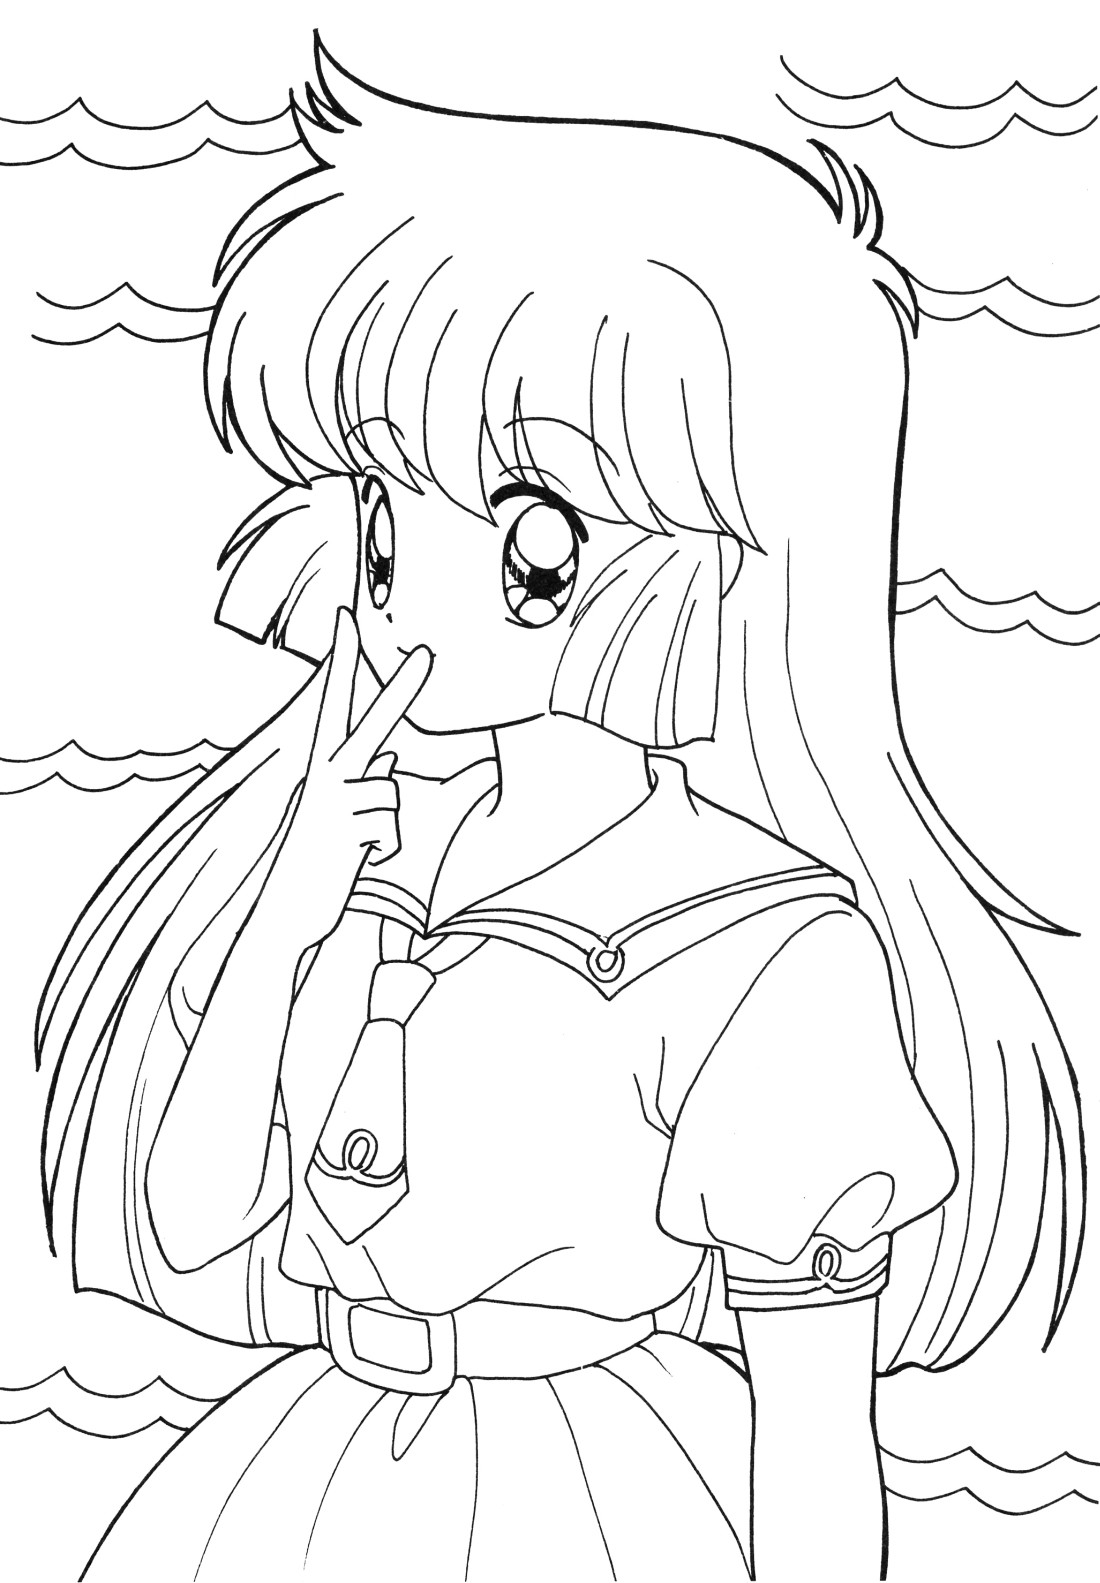 Coloring Pages Of Anime Girls
 Anime Coloring Pages Best Coloring Pages For Kids